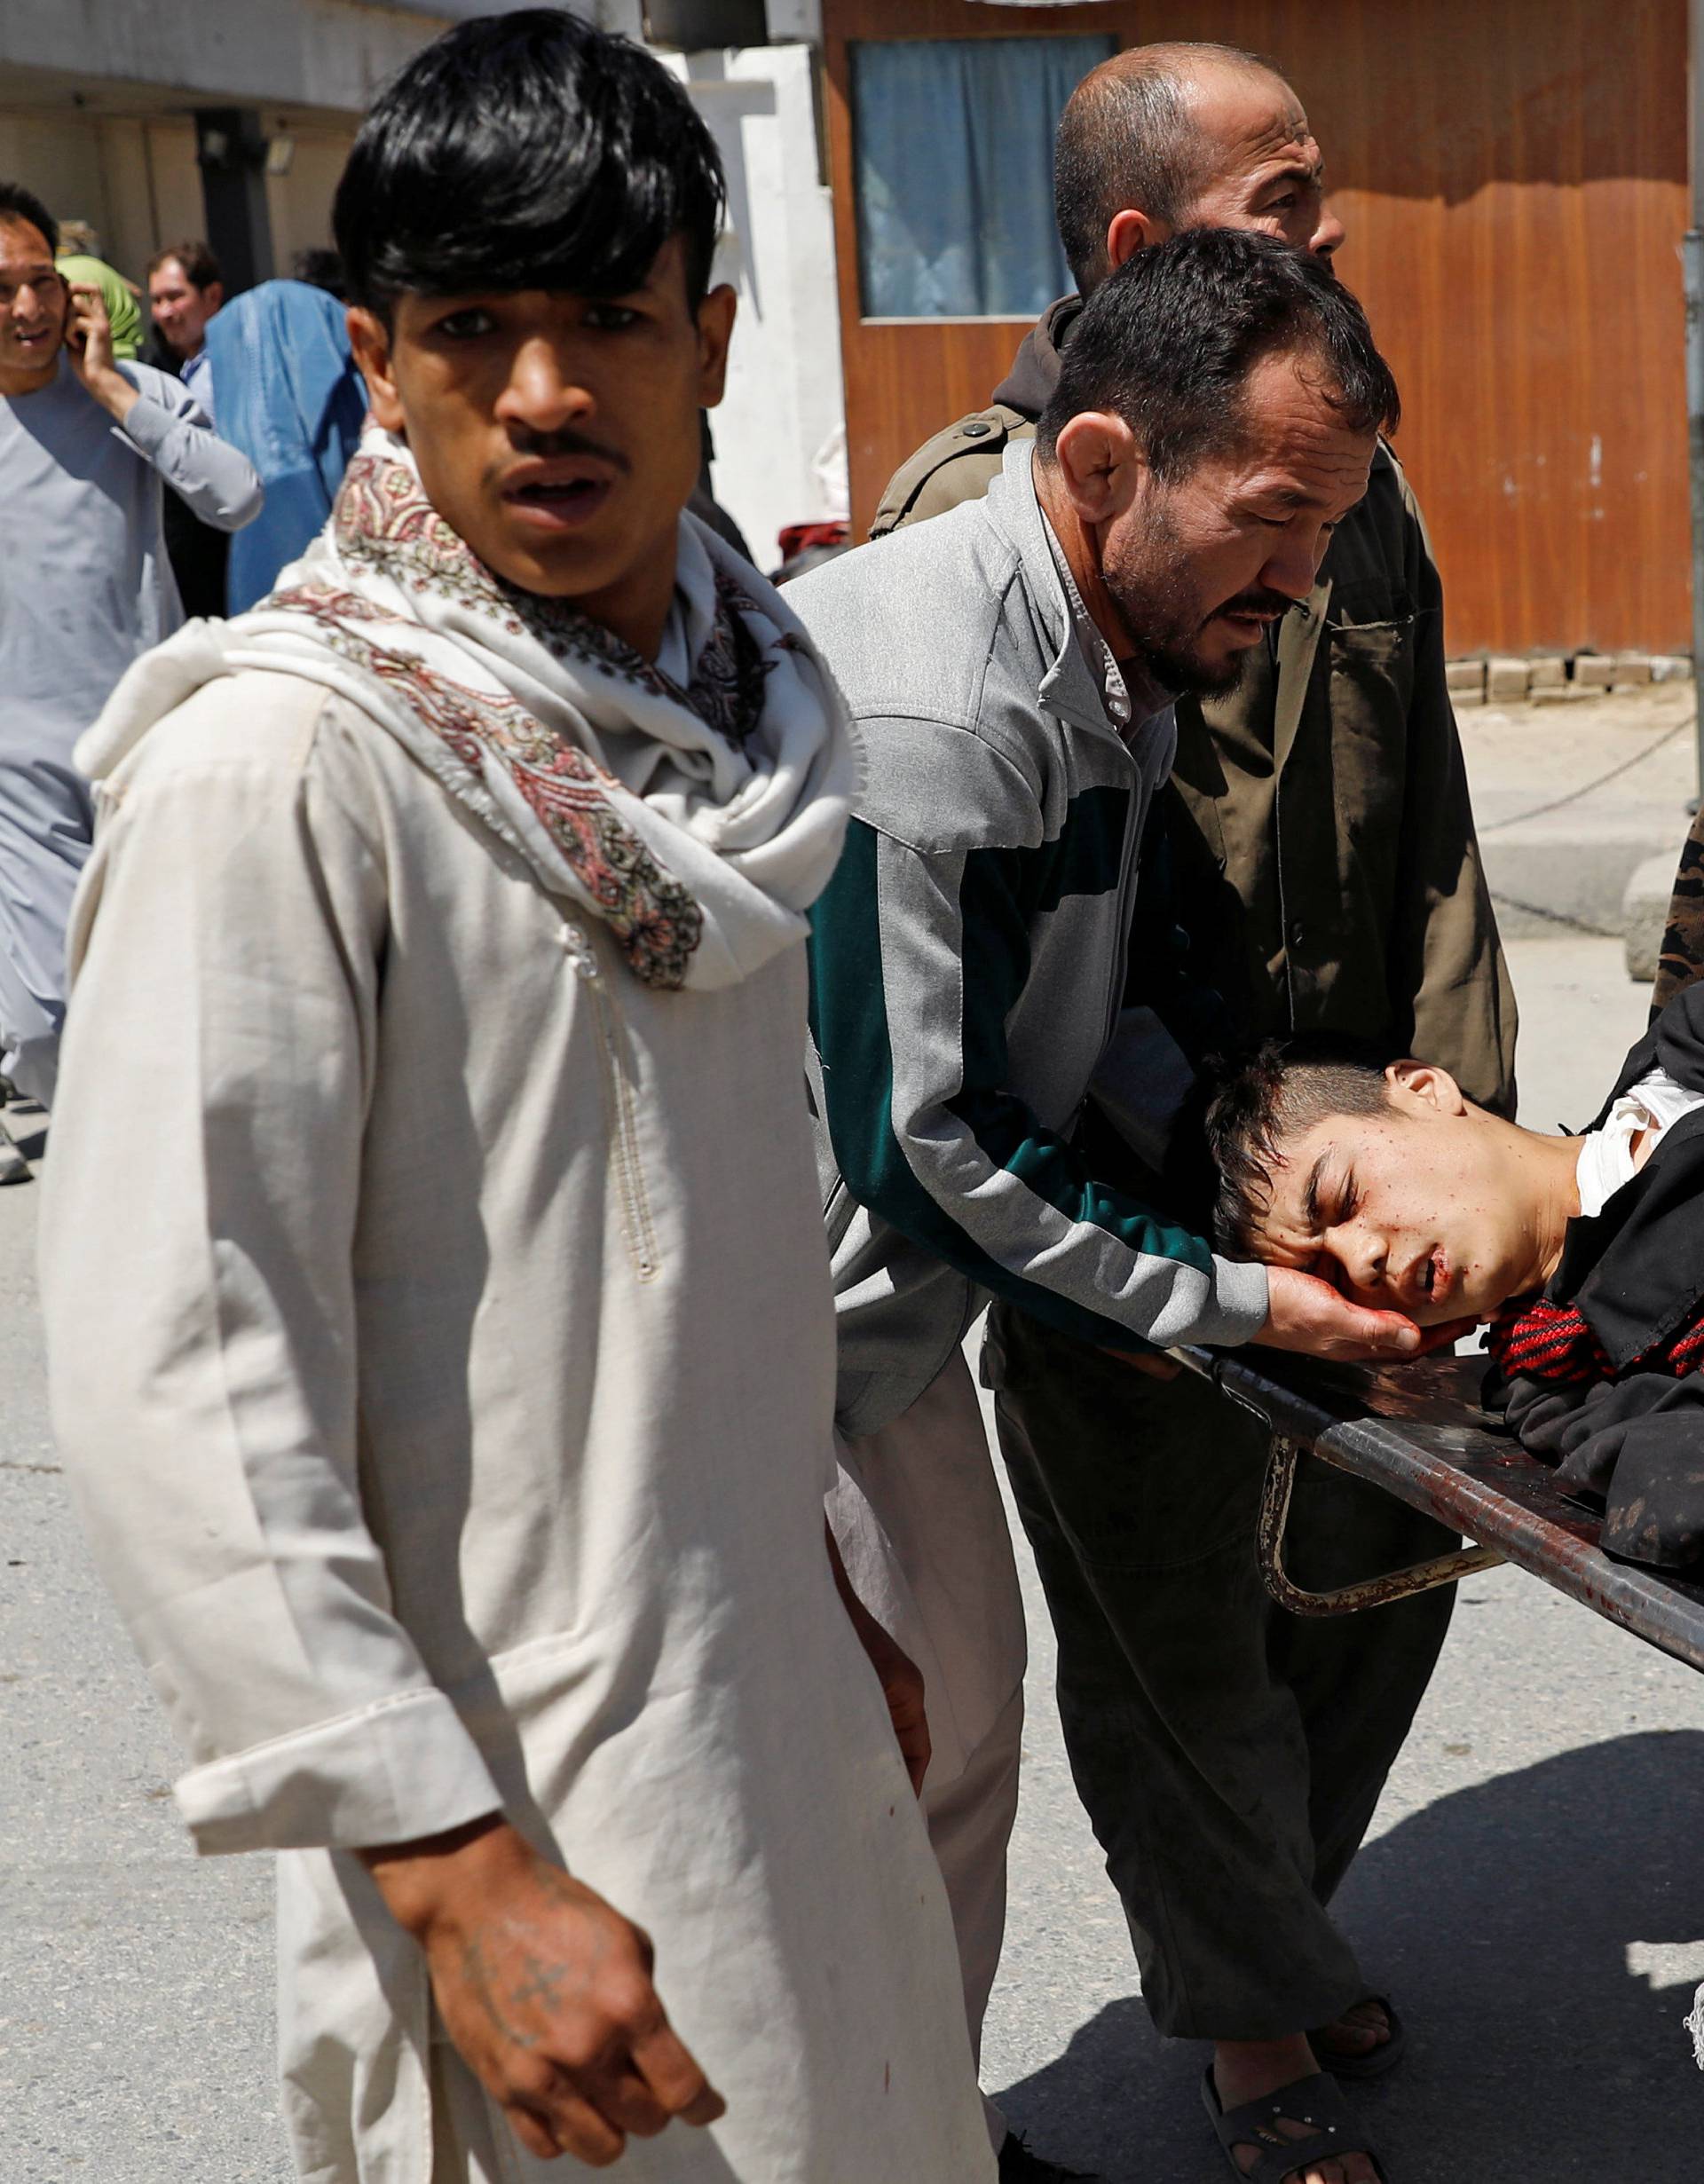 Relatives carry an injured man outside a hospital after a suicide attack in Kabul